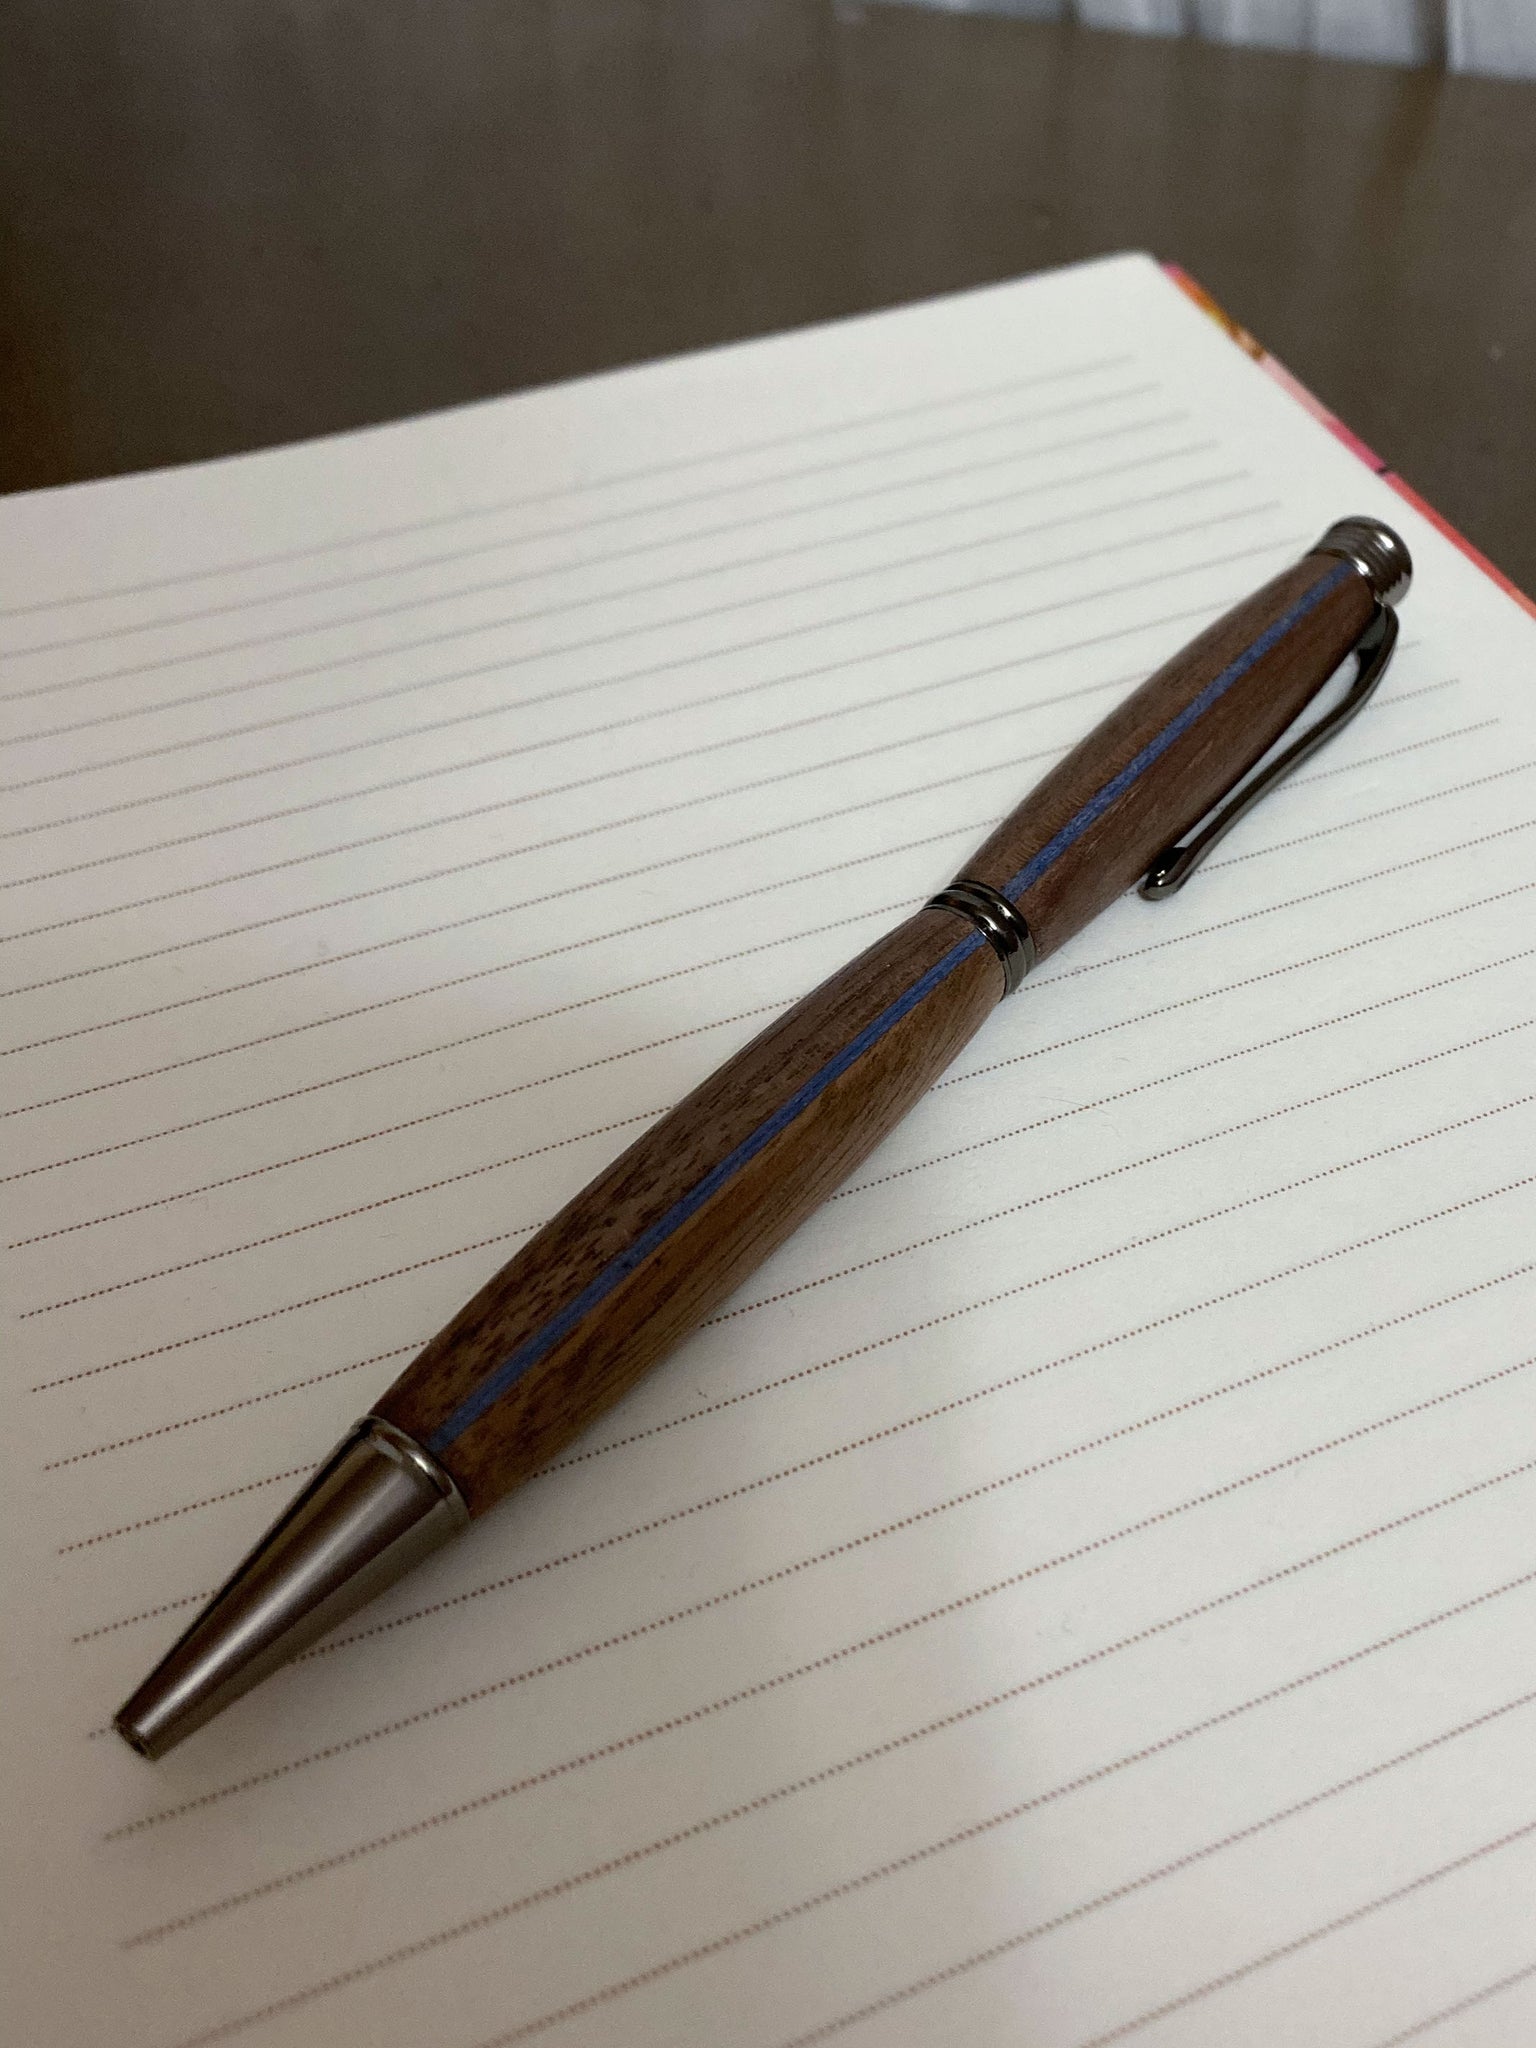 Walnut hand turned pen with a blue stripe on a notebook.